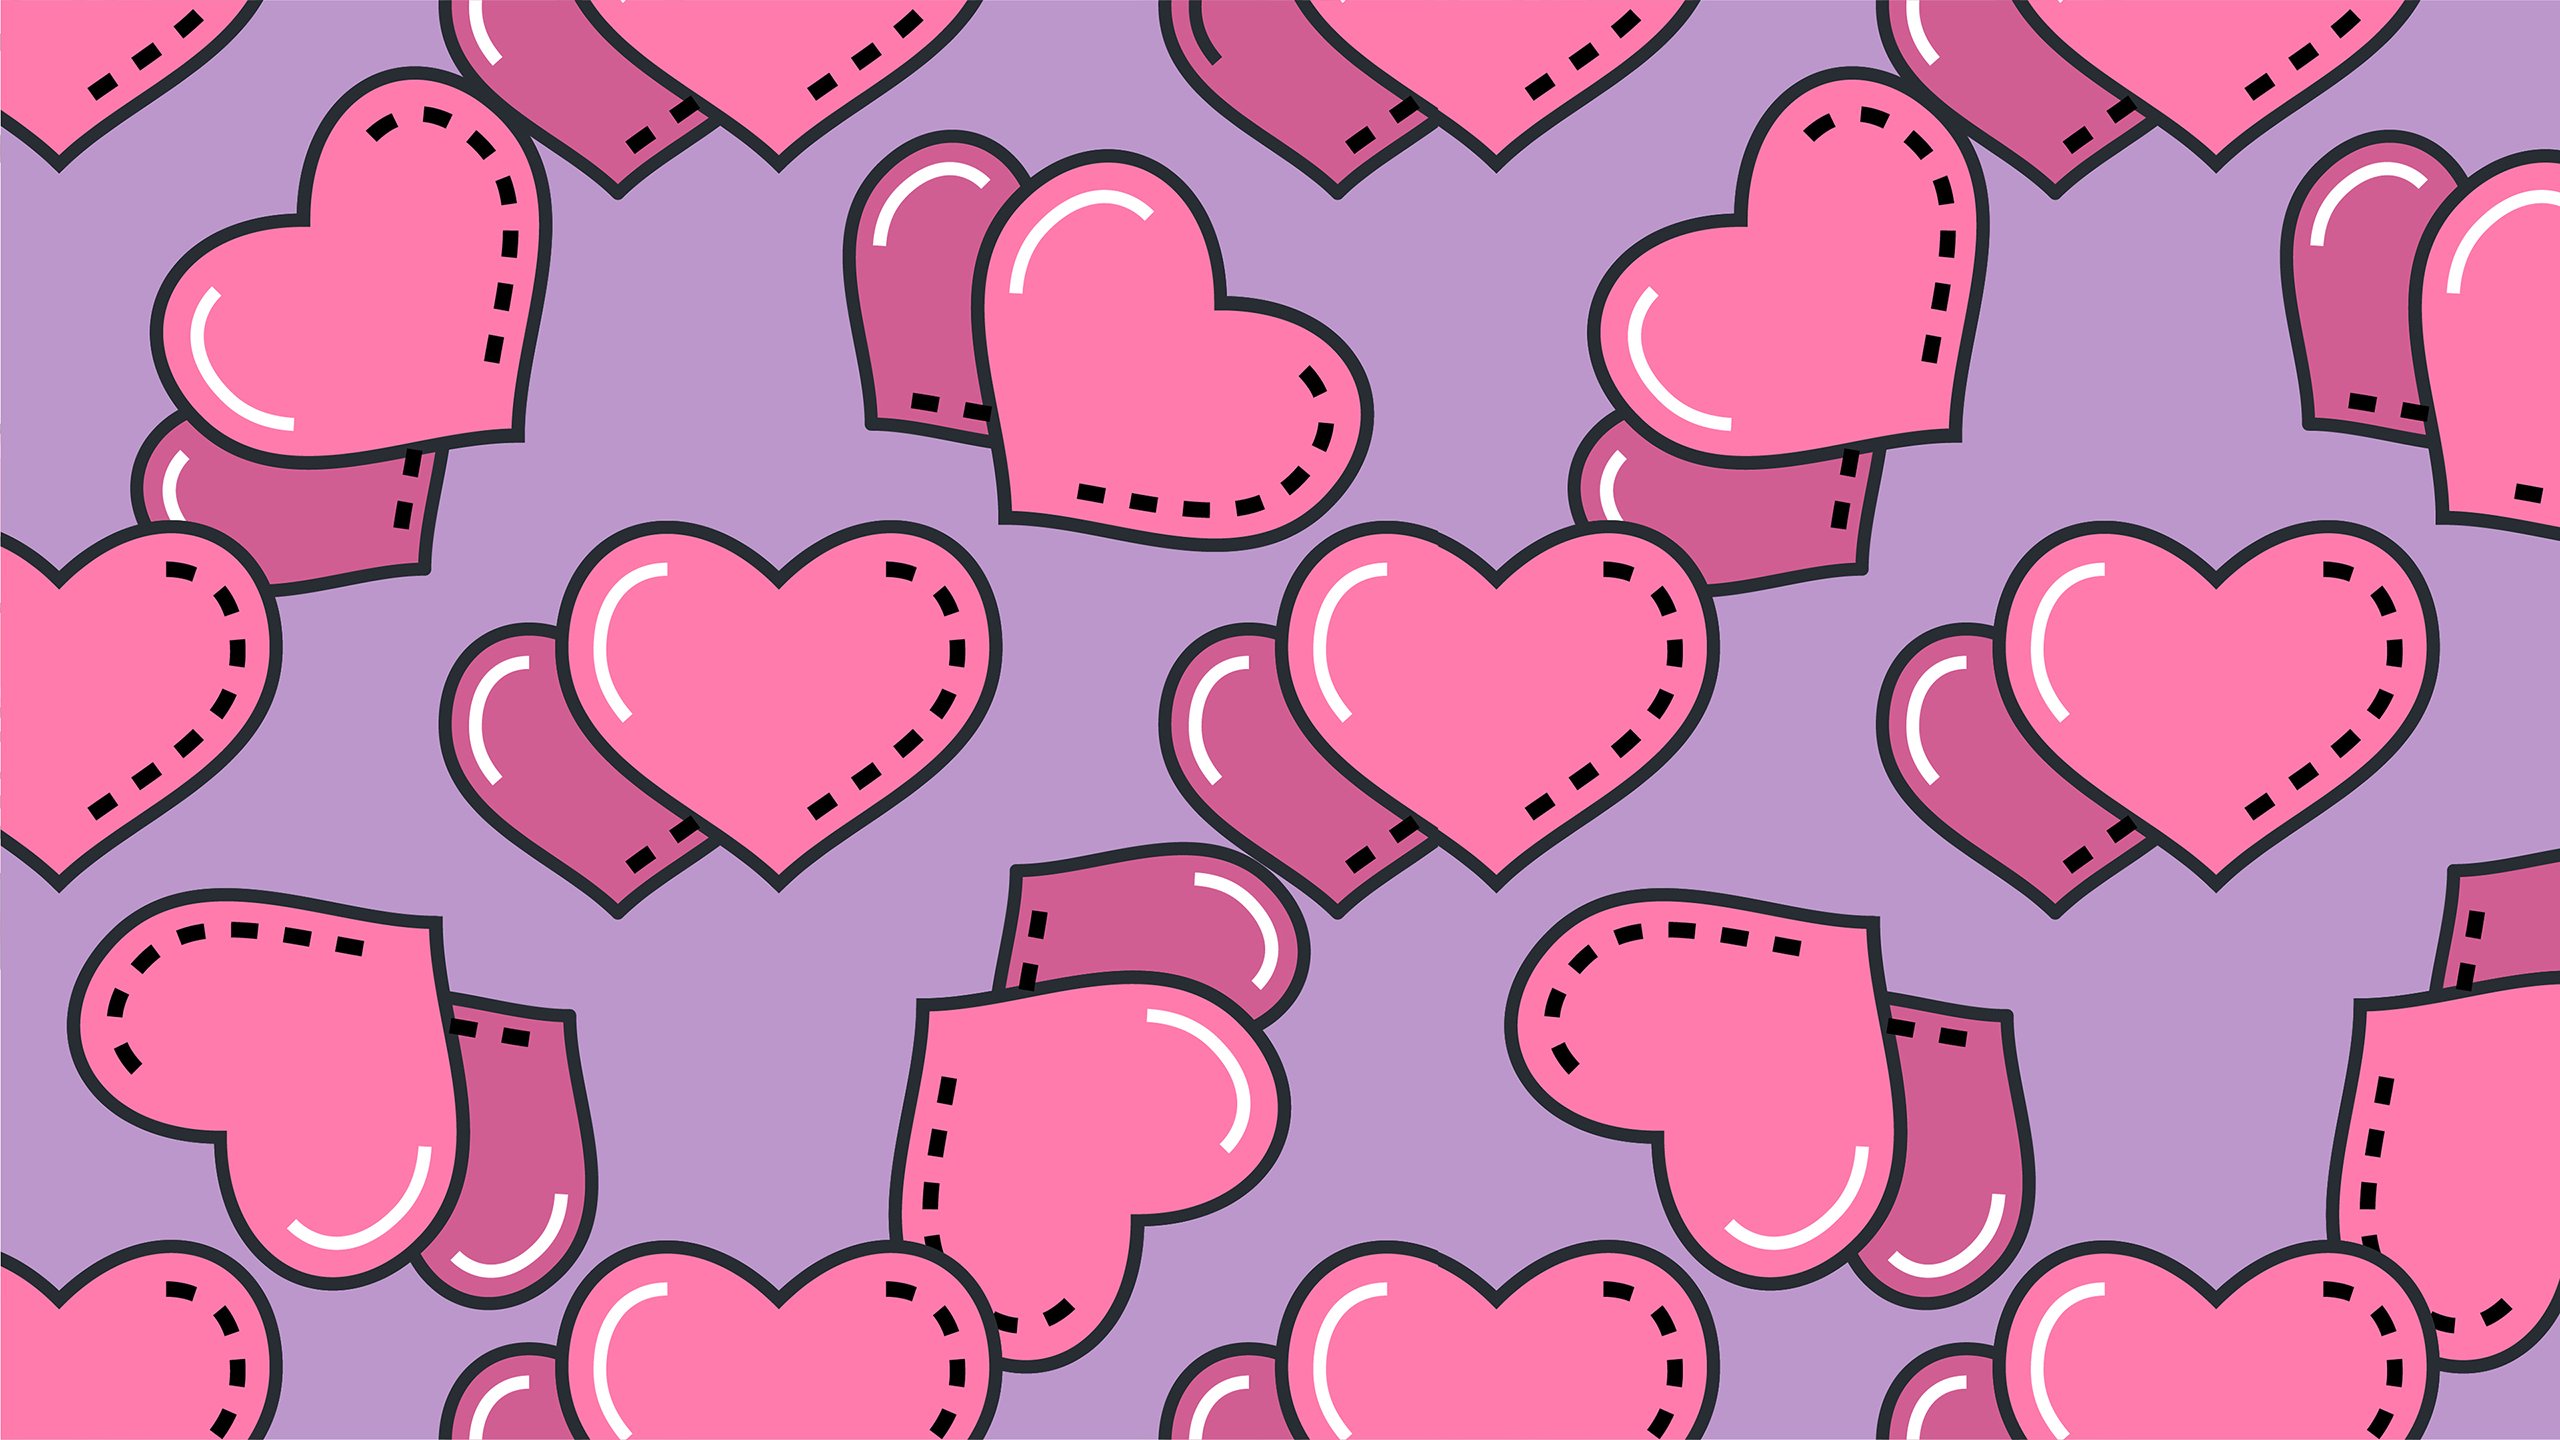 Only Love Hearts 2K Wallpaper x 1440 px